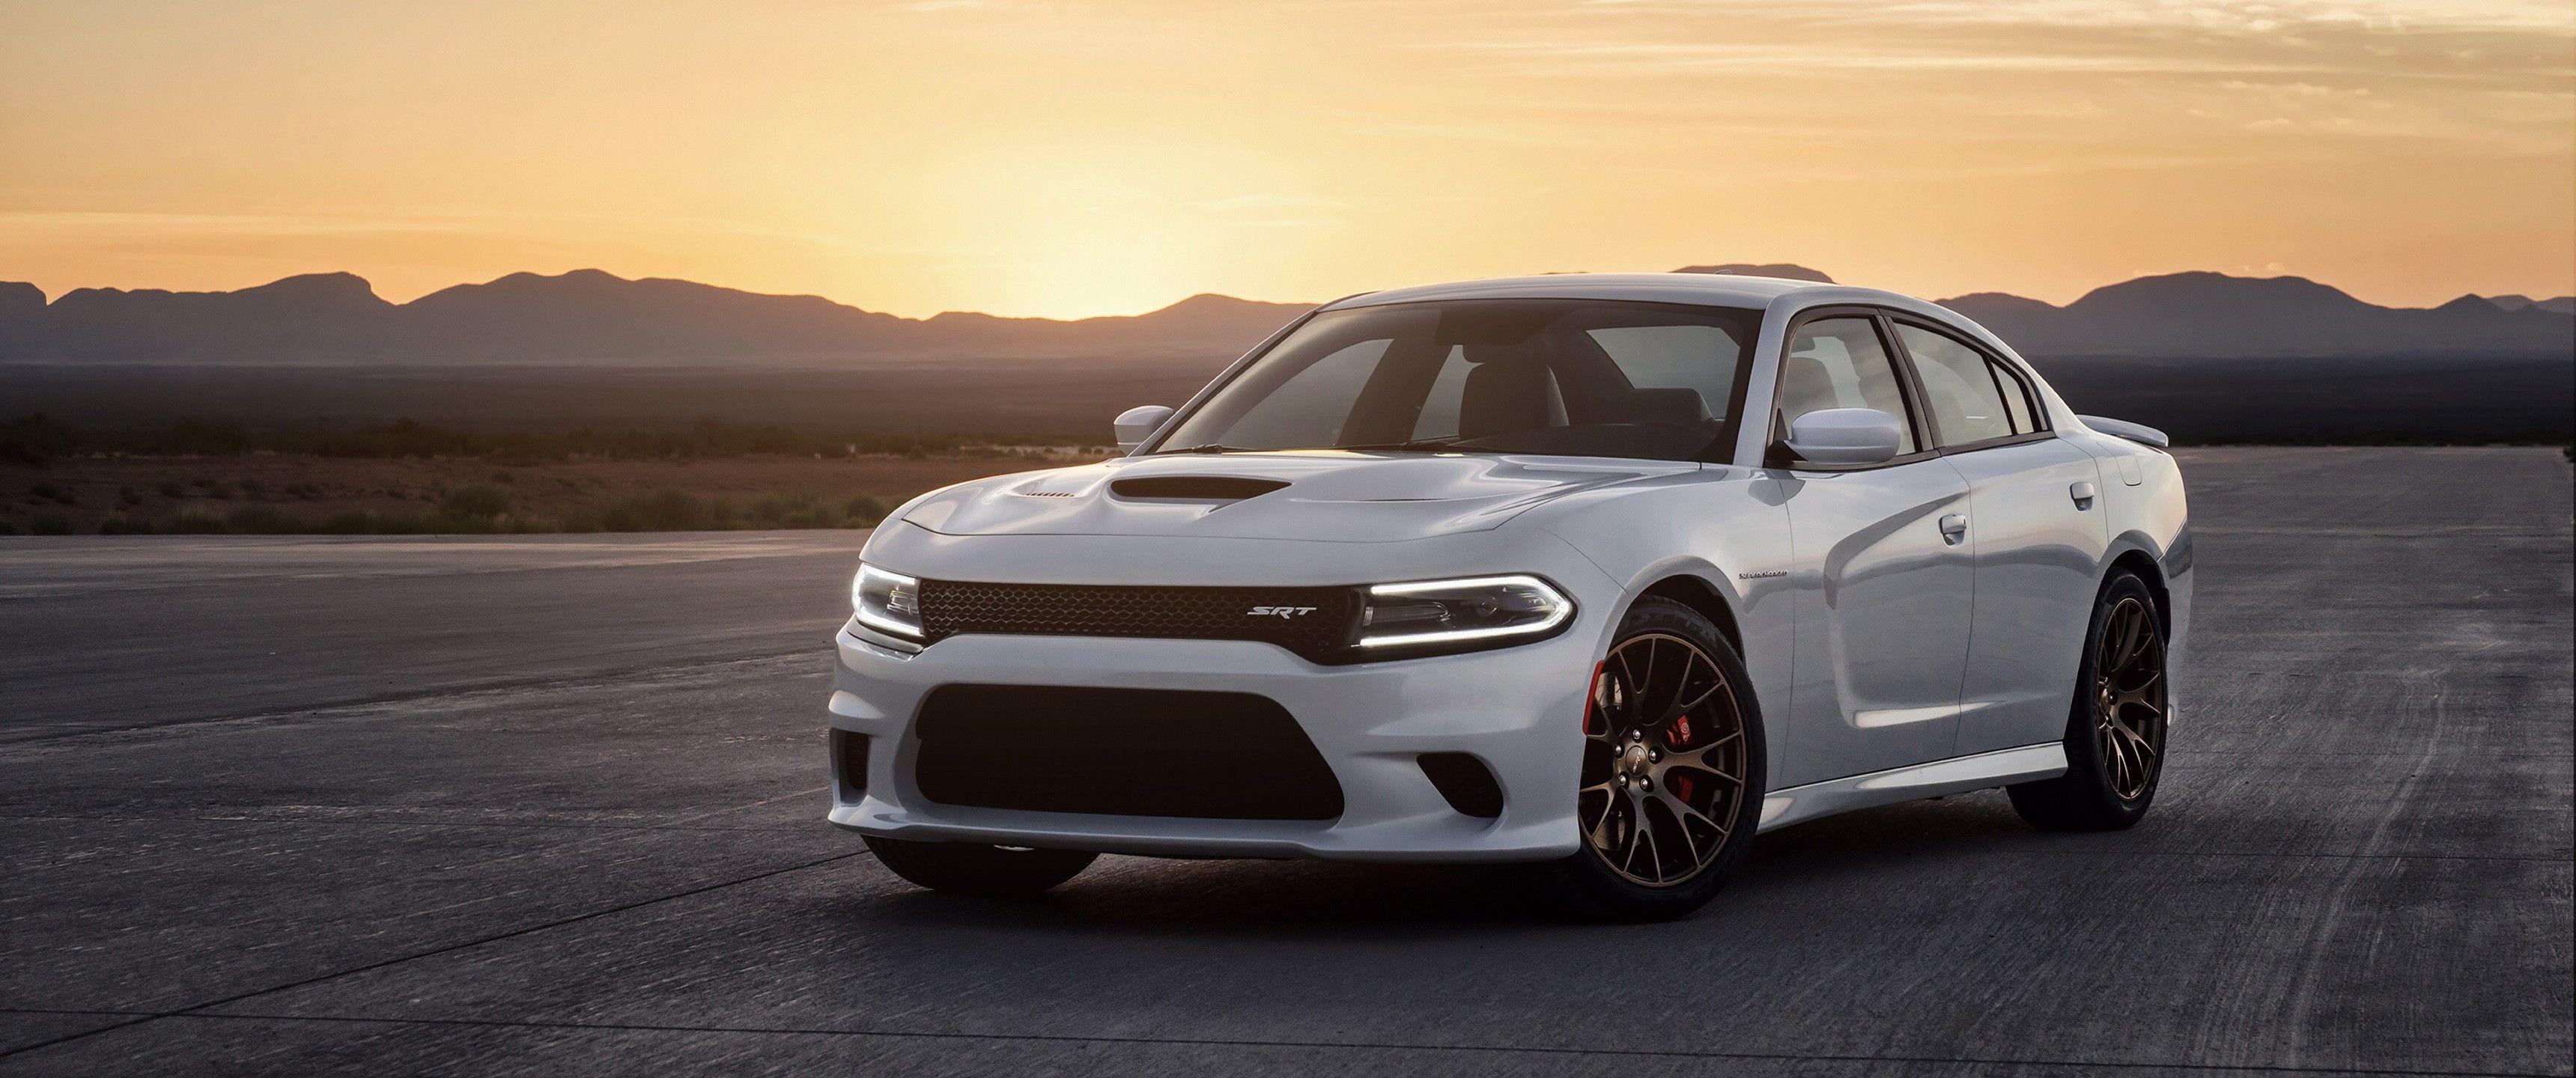 Dodge Charger Hellcat, HD Cars, 4k Wallpaper, Image, Background